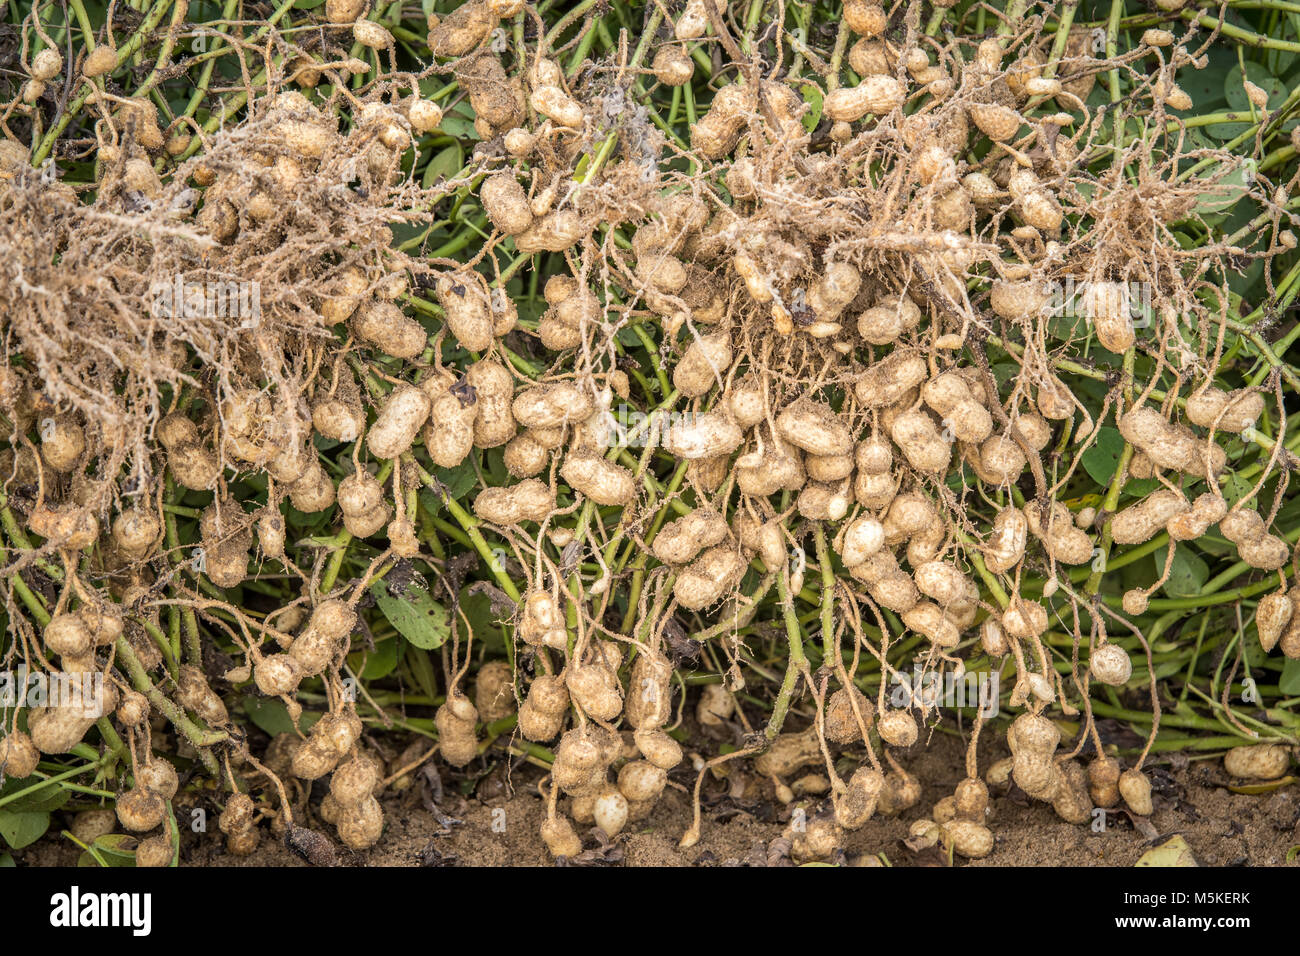 Peanut Plant High Resolution Stock Photography and Images   Alamy